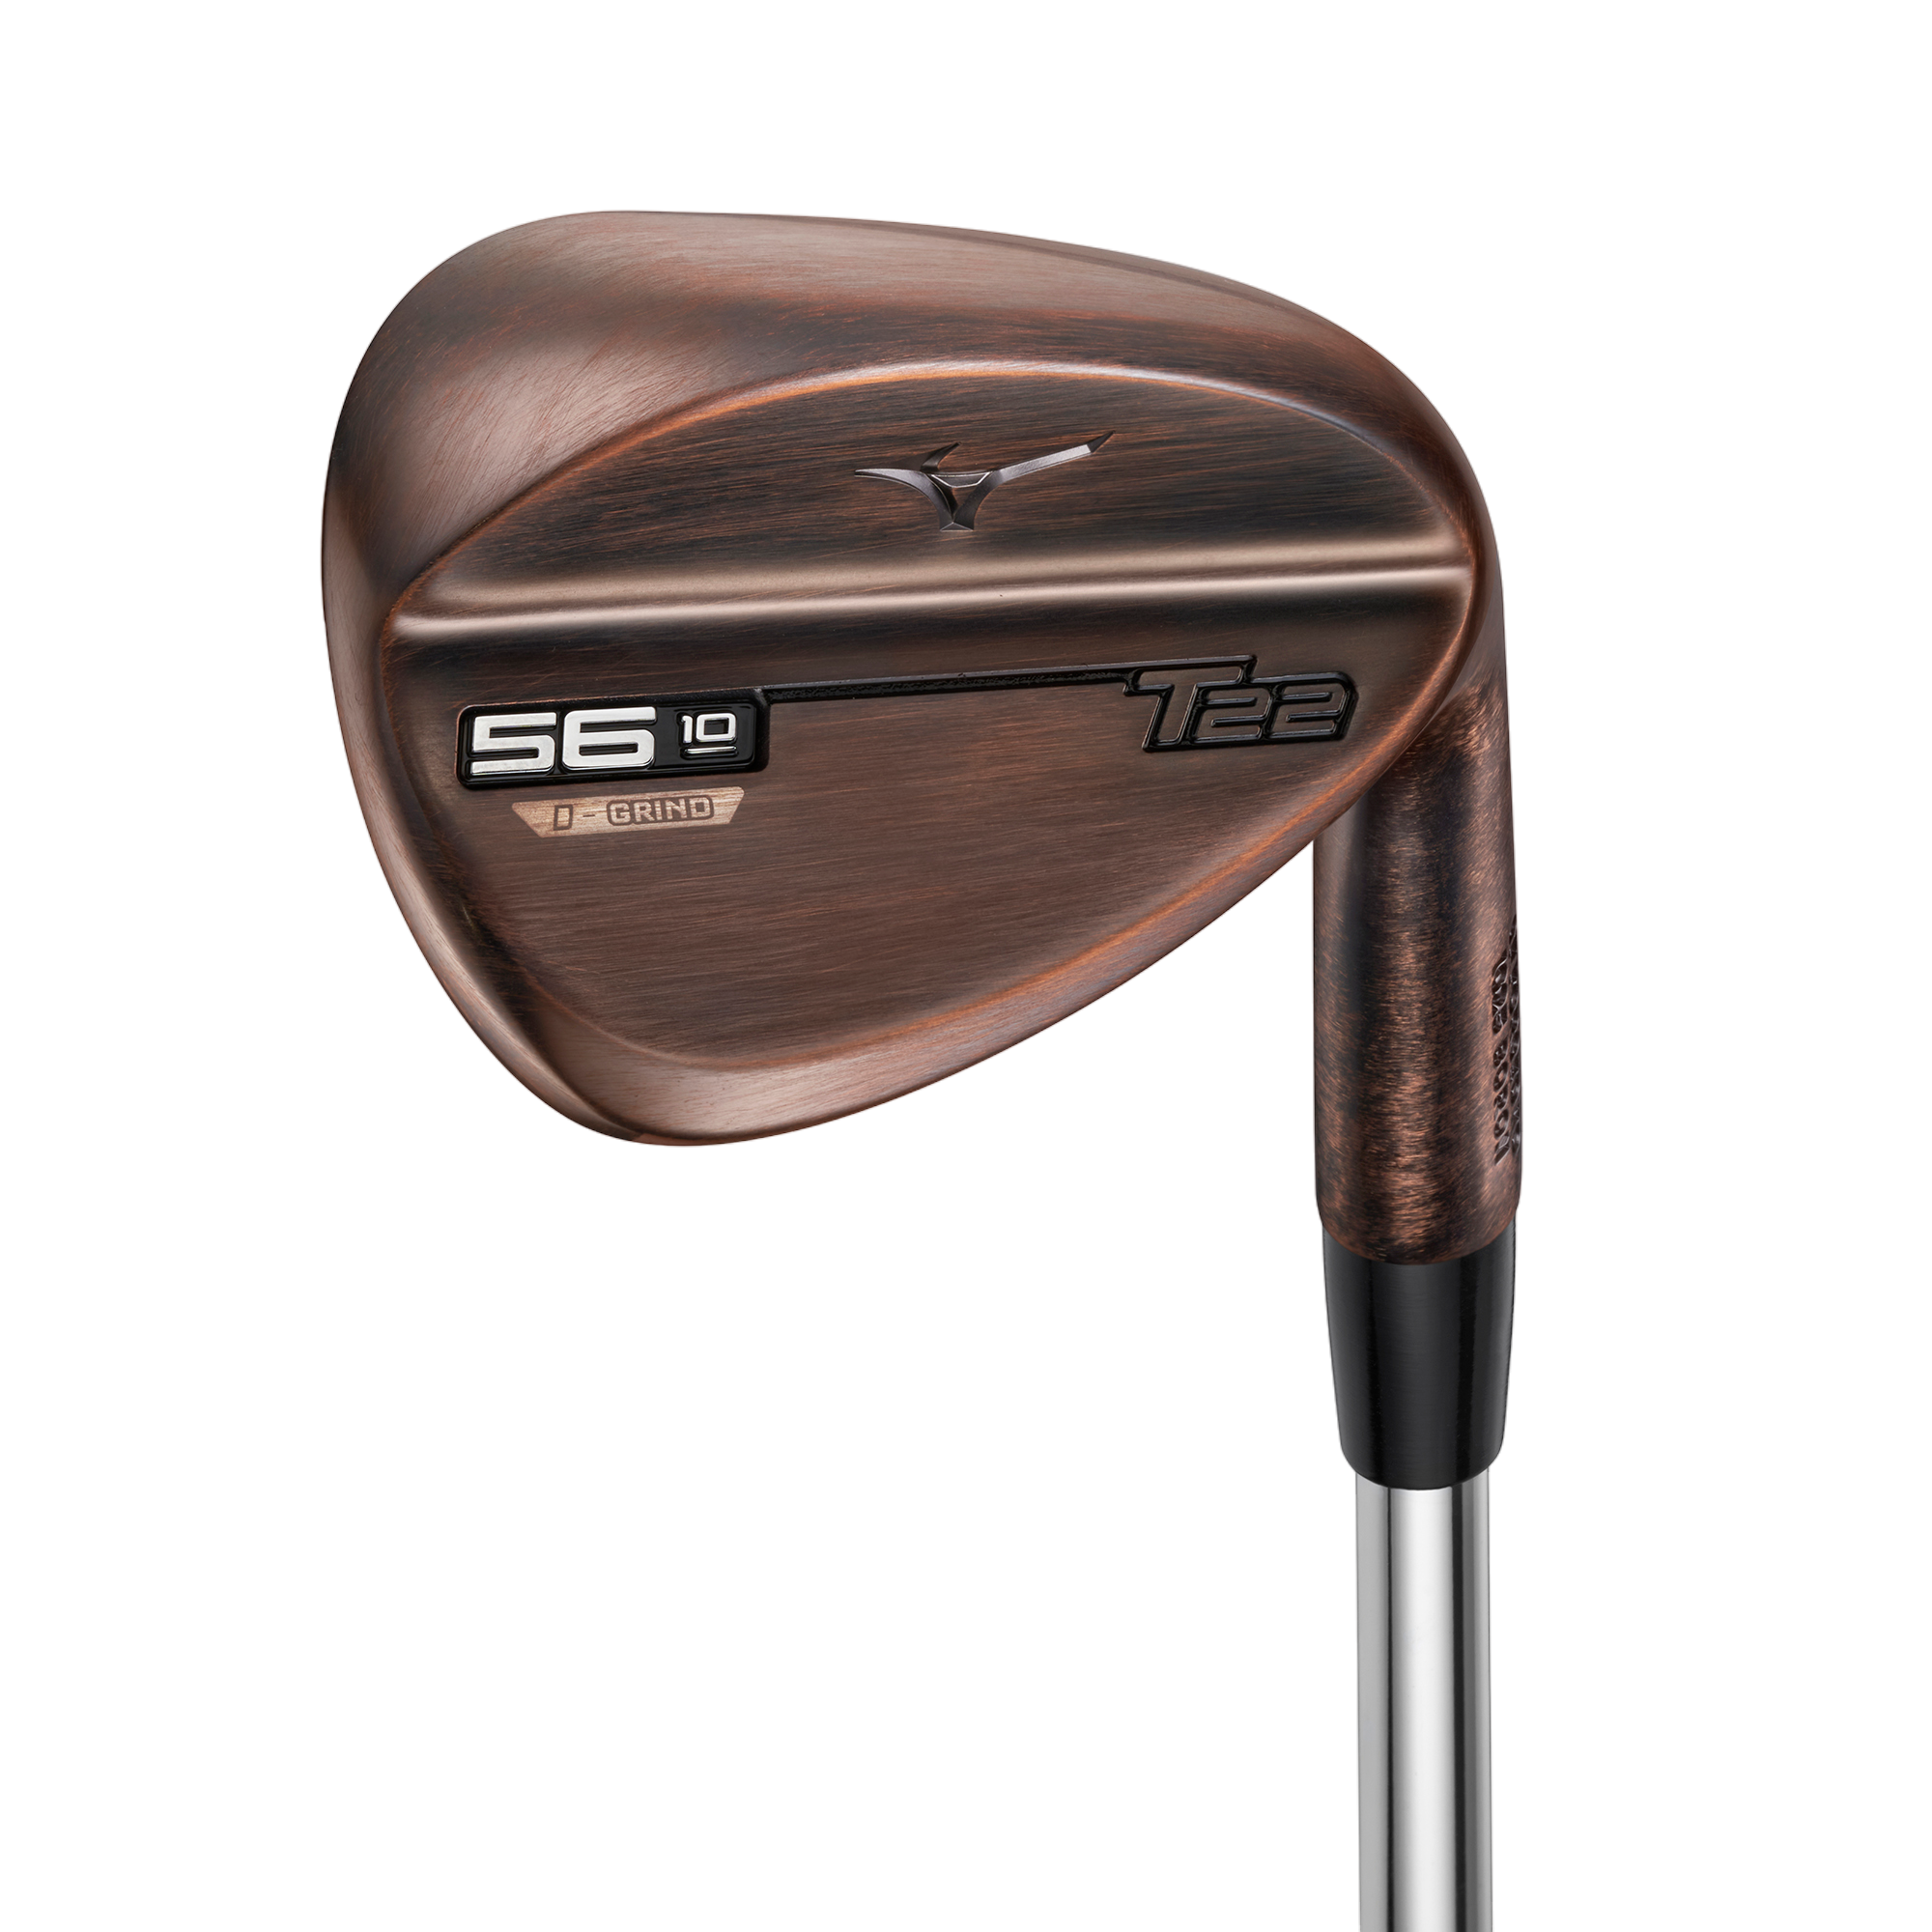 T22 Copper Wedge